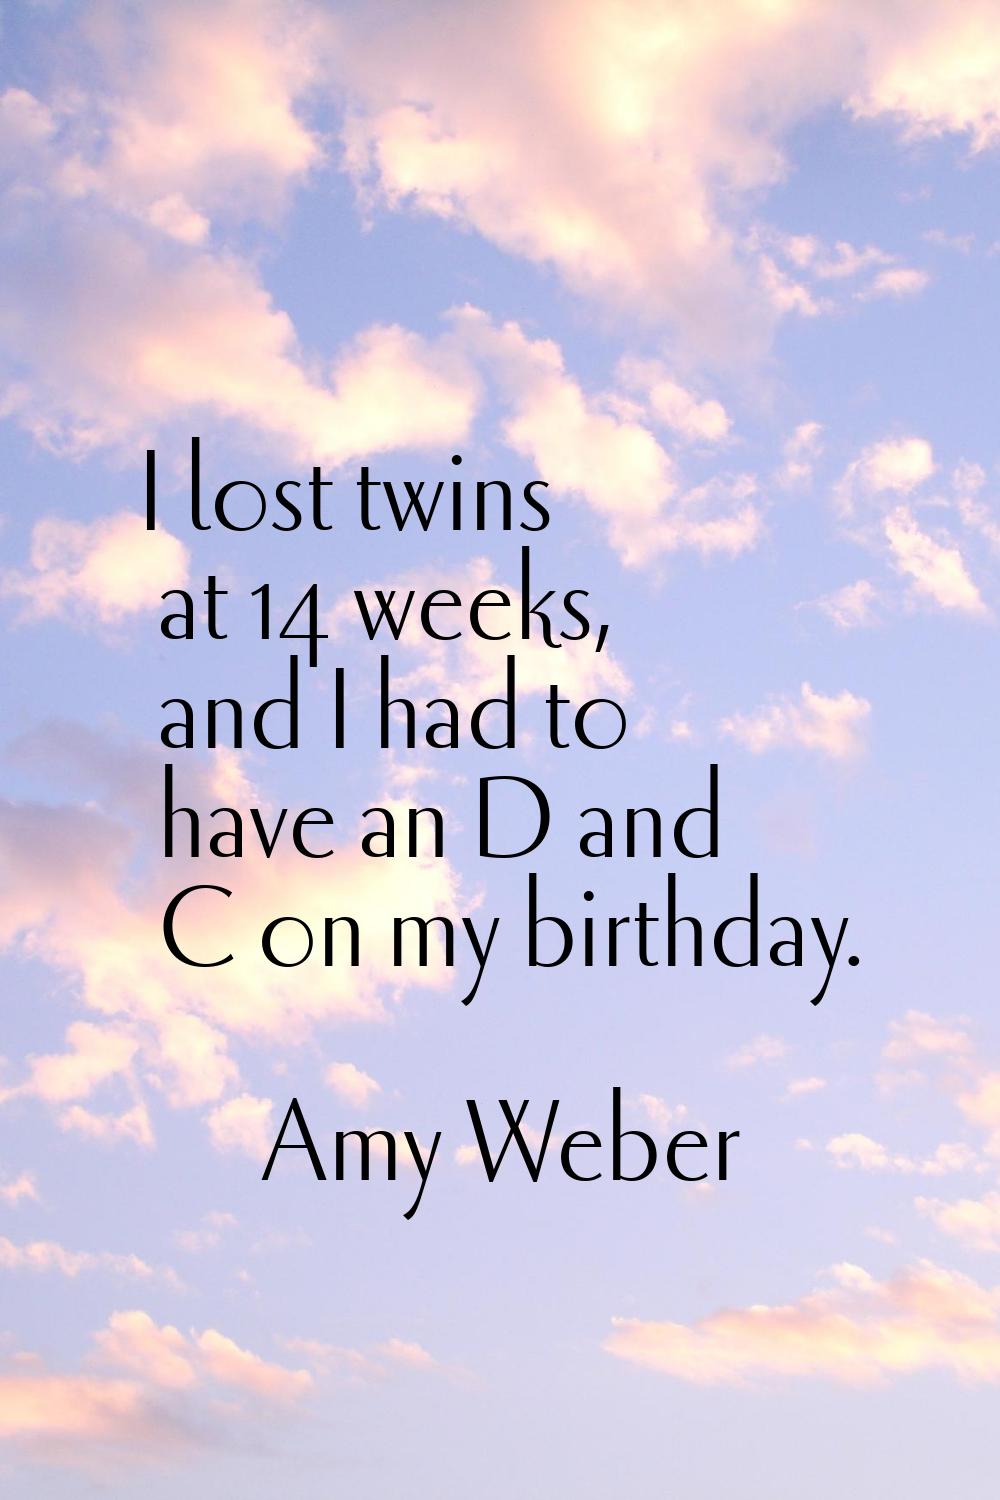 I lost twins at 14 weeks, and I had to have an D and C on my birthday.